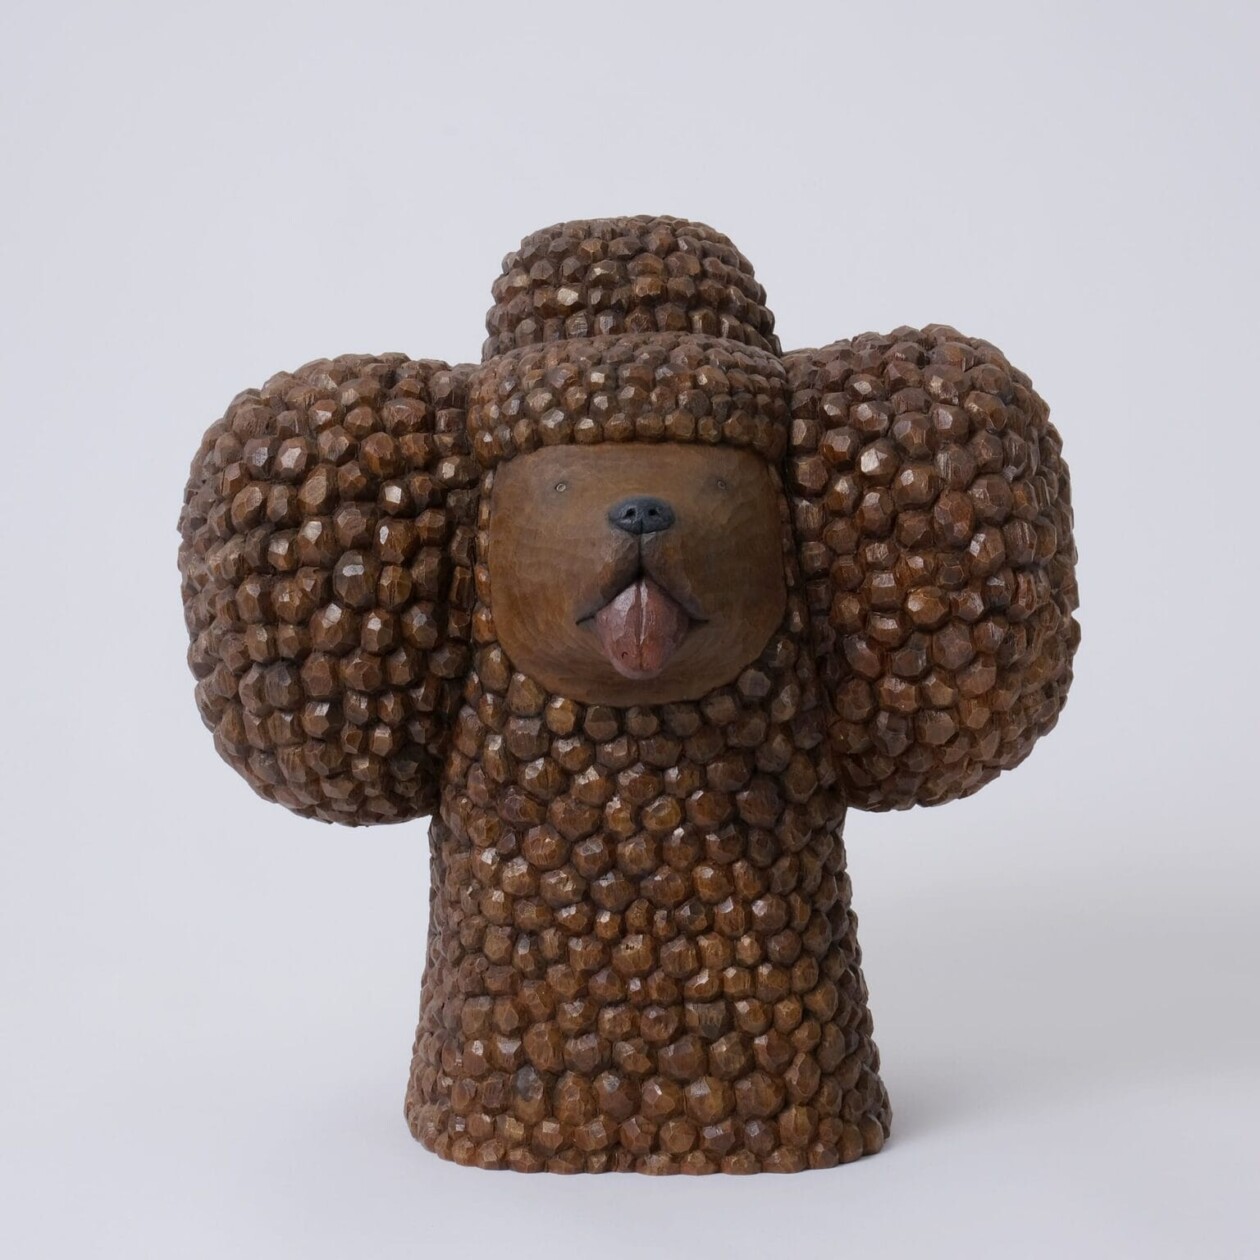 Misato Sano's Wooden Sculptures Bring Canine Companions To Life (11)